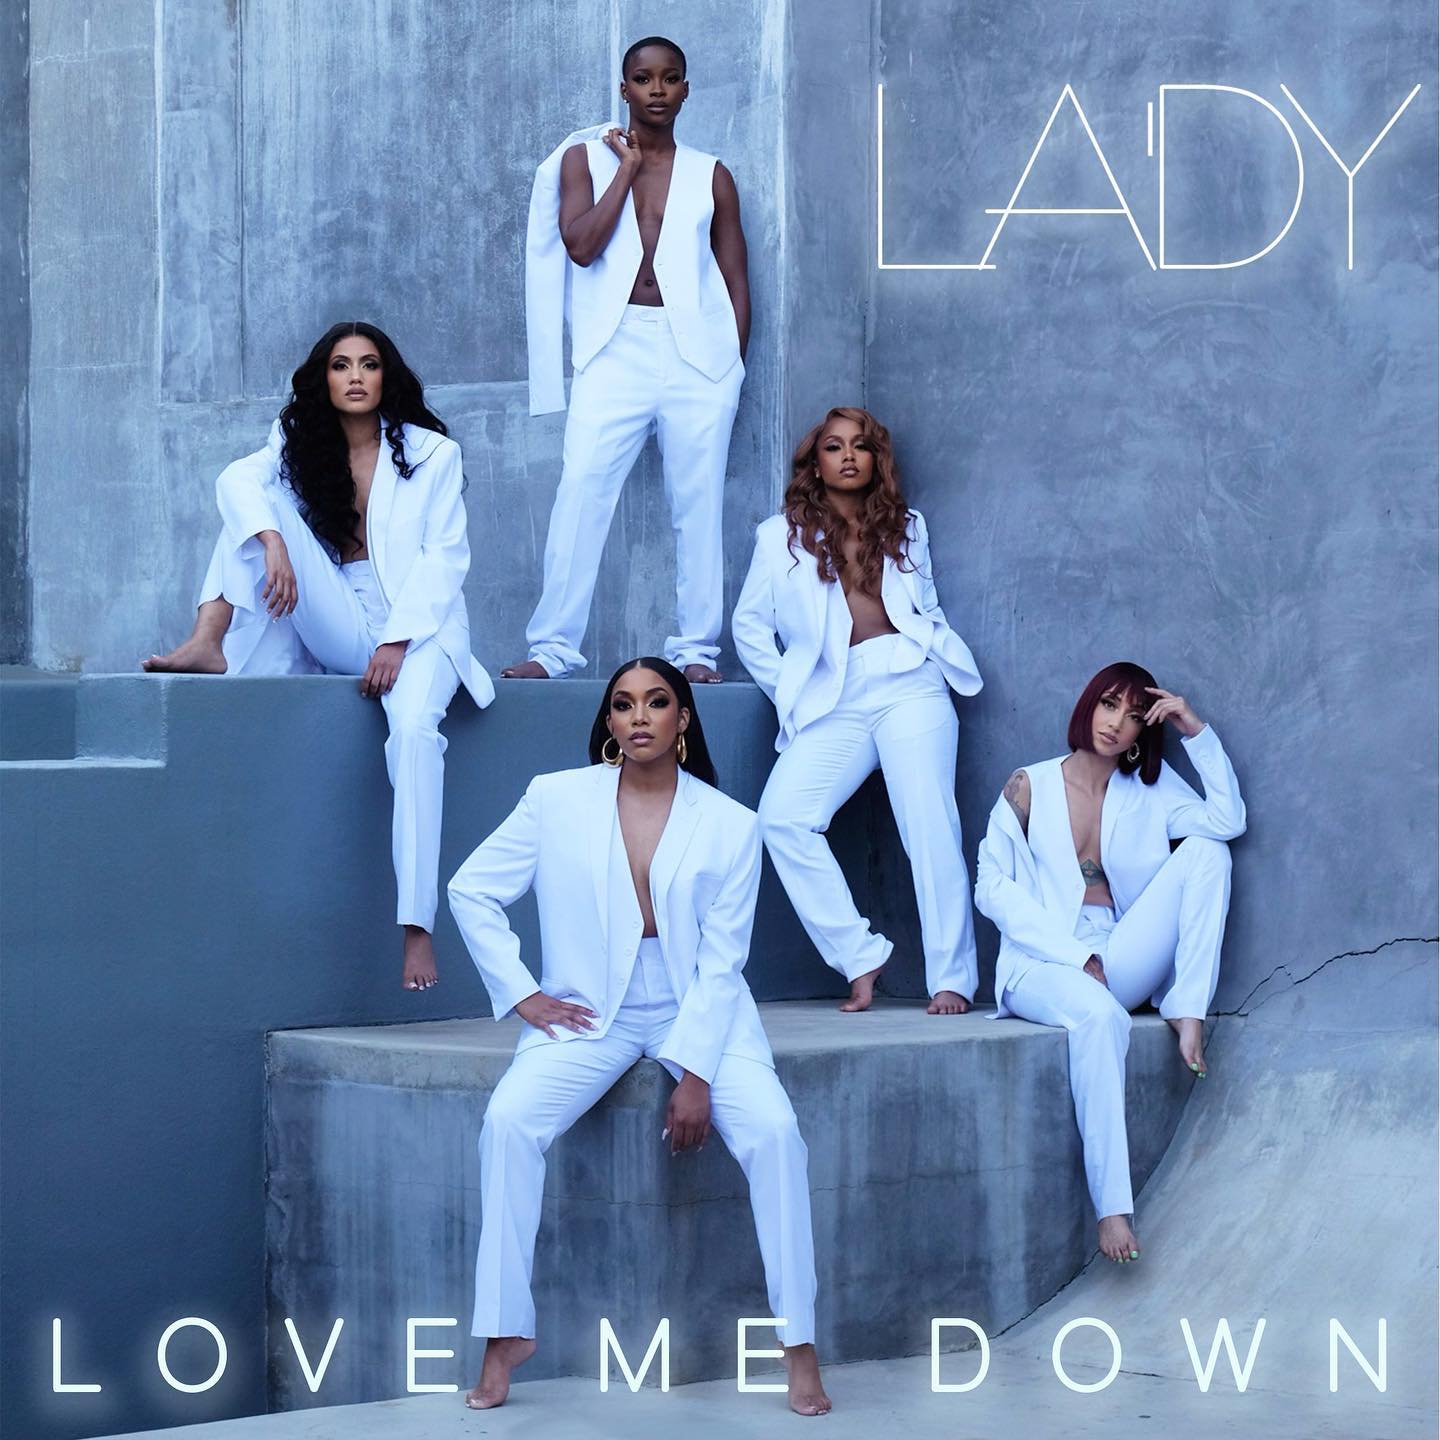 RISING ALL BLACK FEMALE BAND LA’DY RELEASES NEW SINGLE LOVE ME DOWN